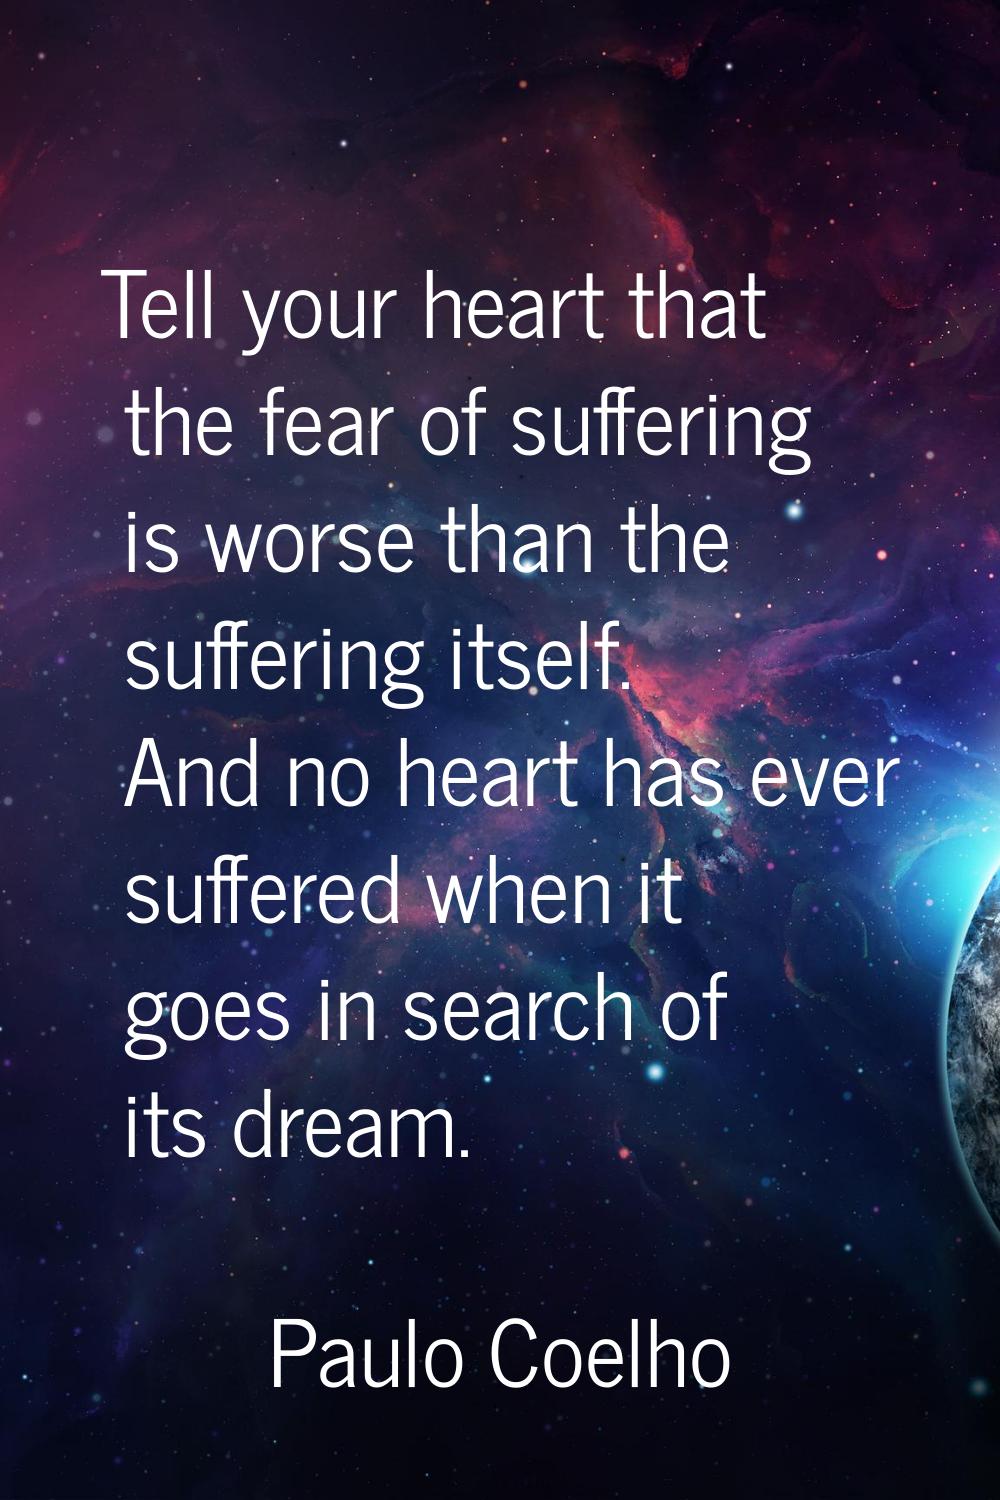 Tell your heart that the fear of suffering is worse than the suffering itself. And no heart has eve